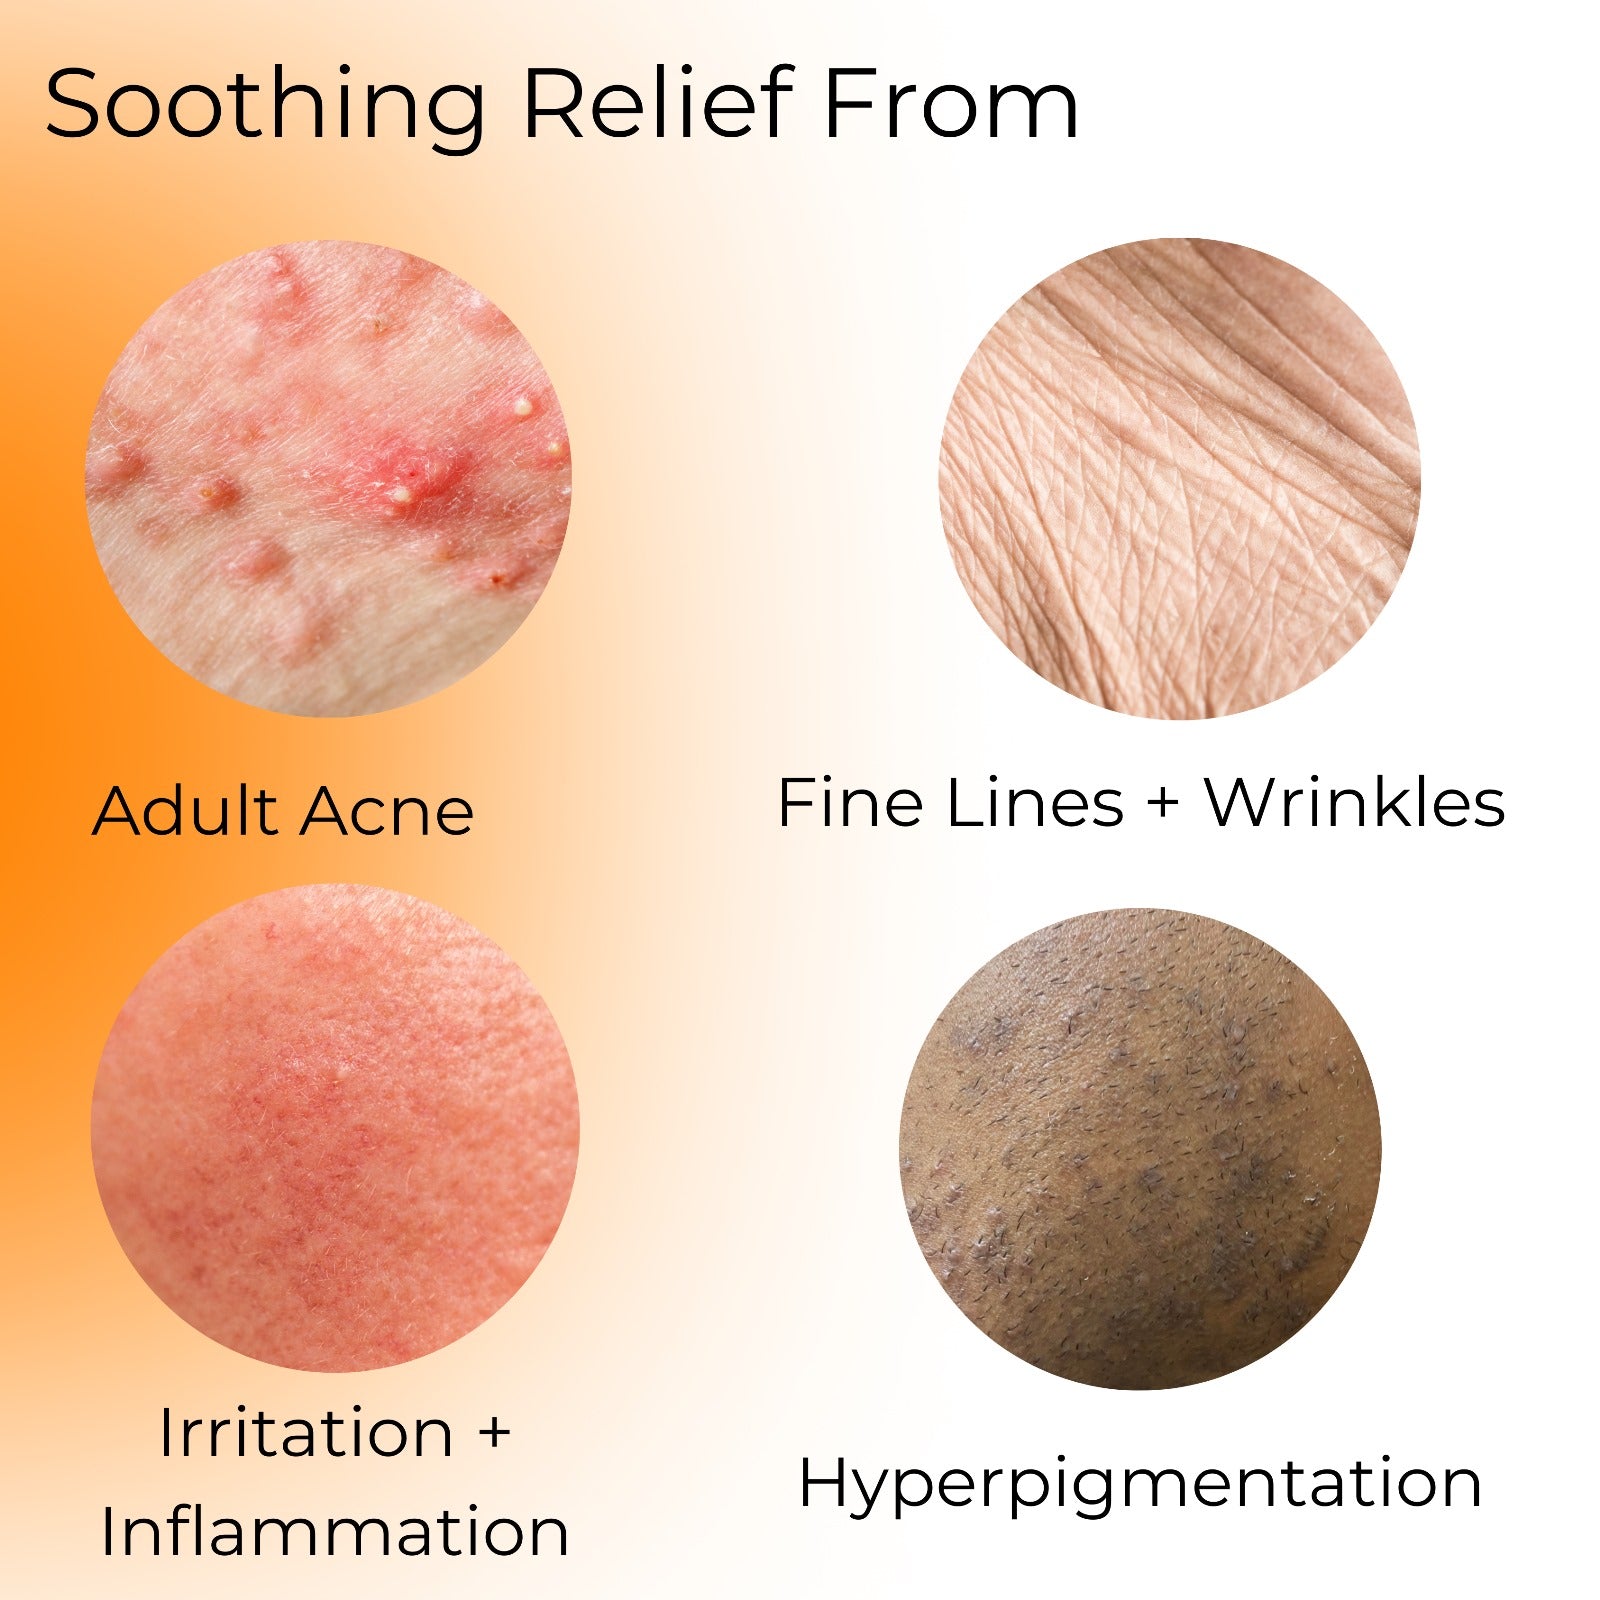 Soothing relief from adult acne, irritation and inflammation, fine lines and wrinkles, and hyperpigmentation.